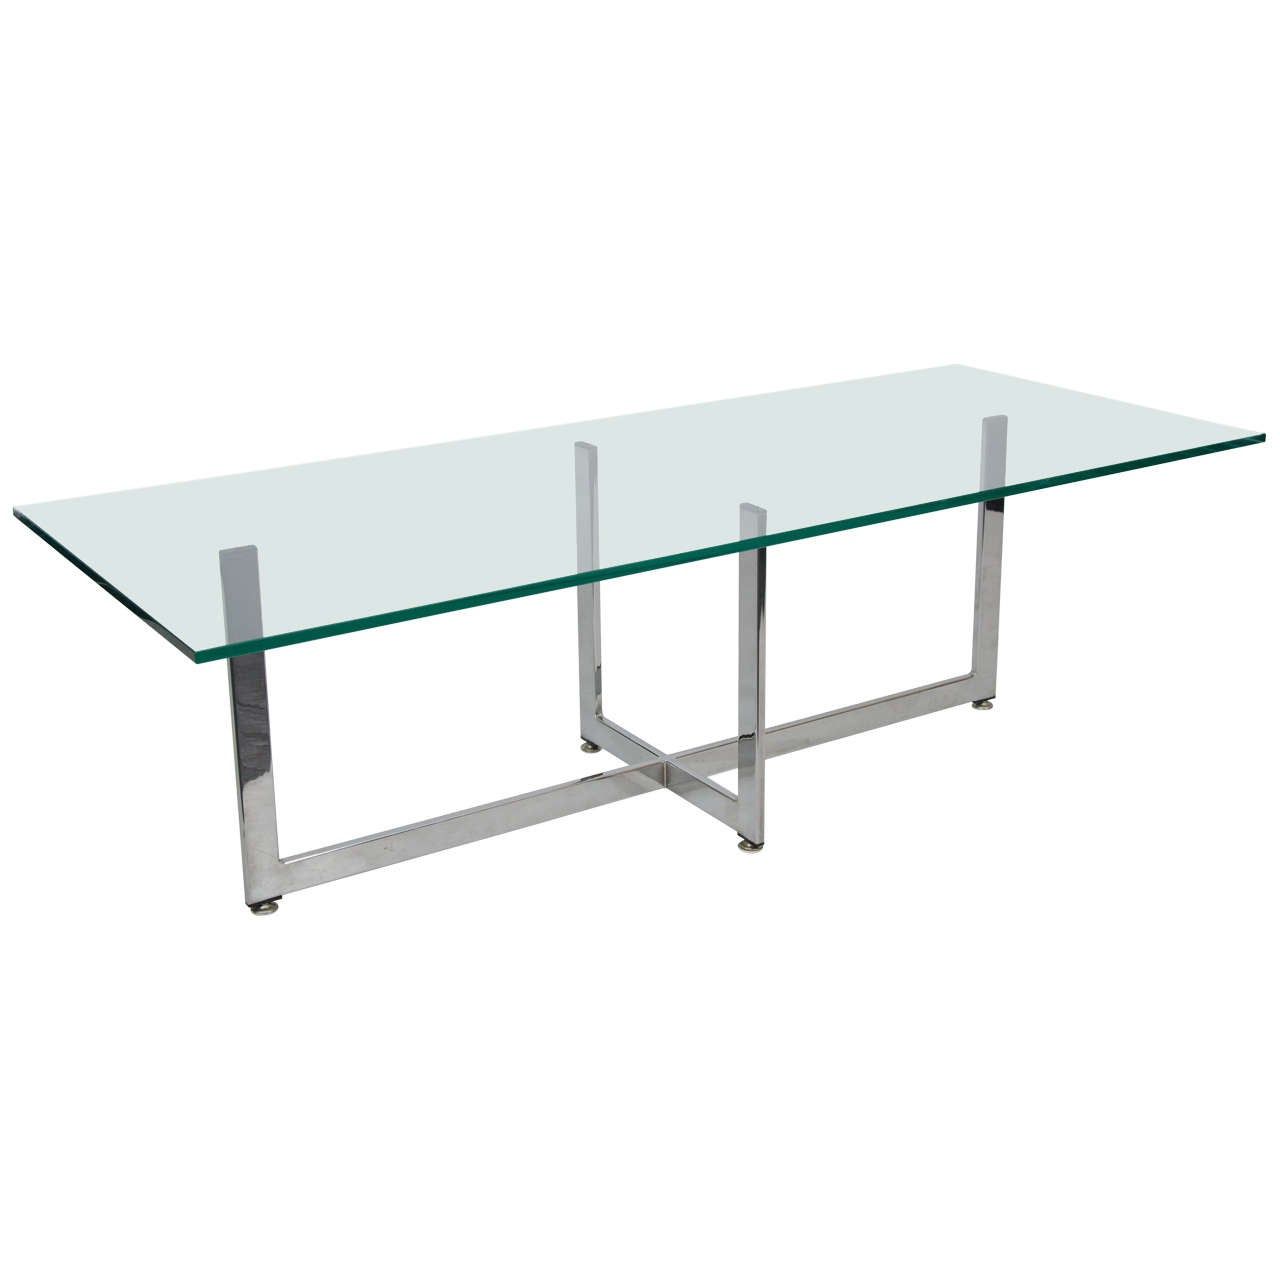 Chrome And Glass Rectangular Coffee Tables For Current Floating Rectangular Glass And Chrome Coffee Table At 1stdibs (View 9 of 10)